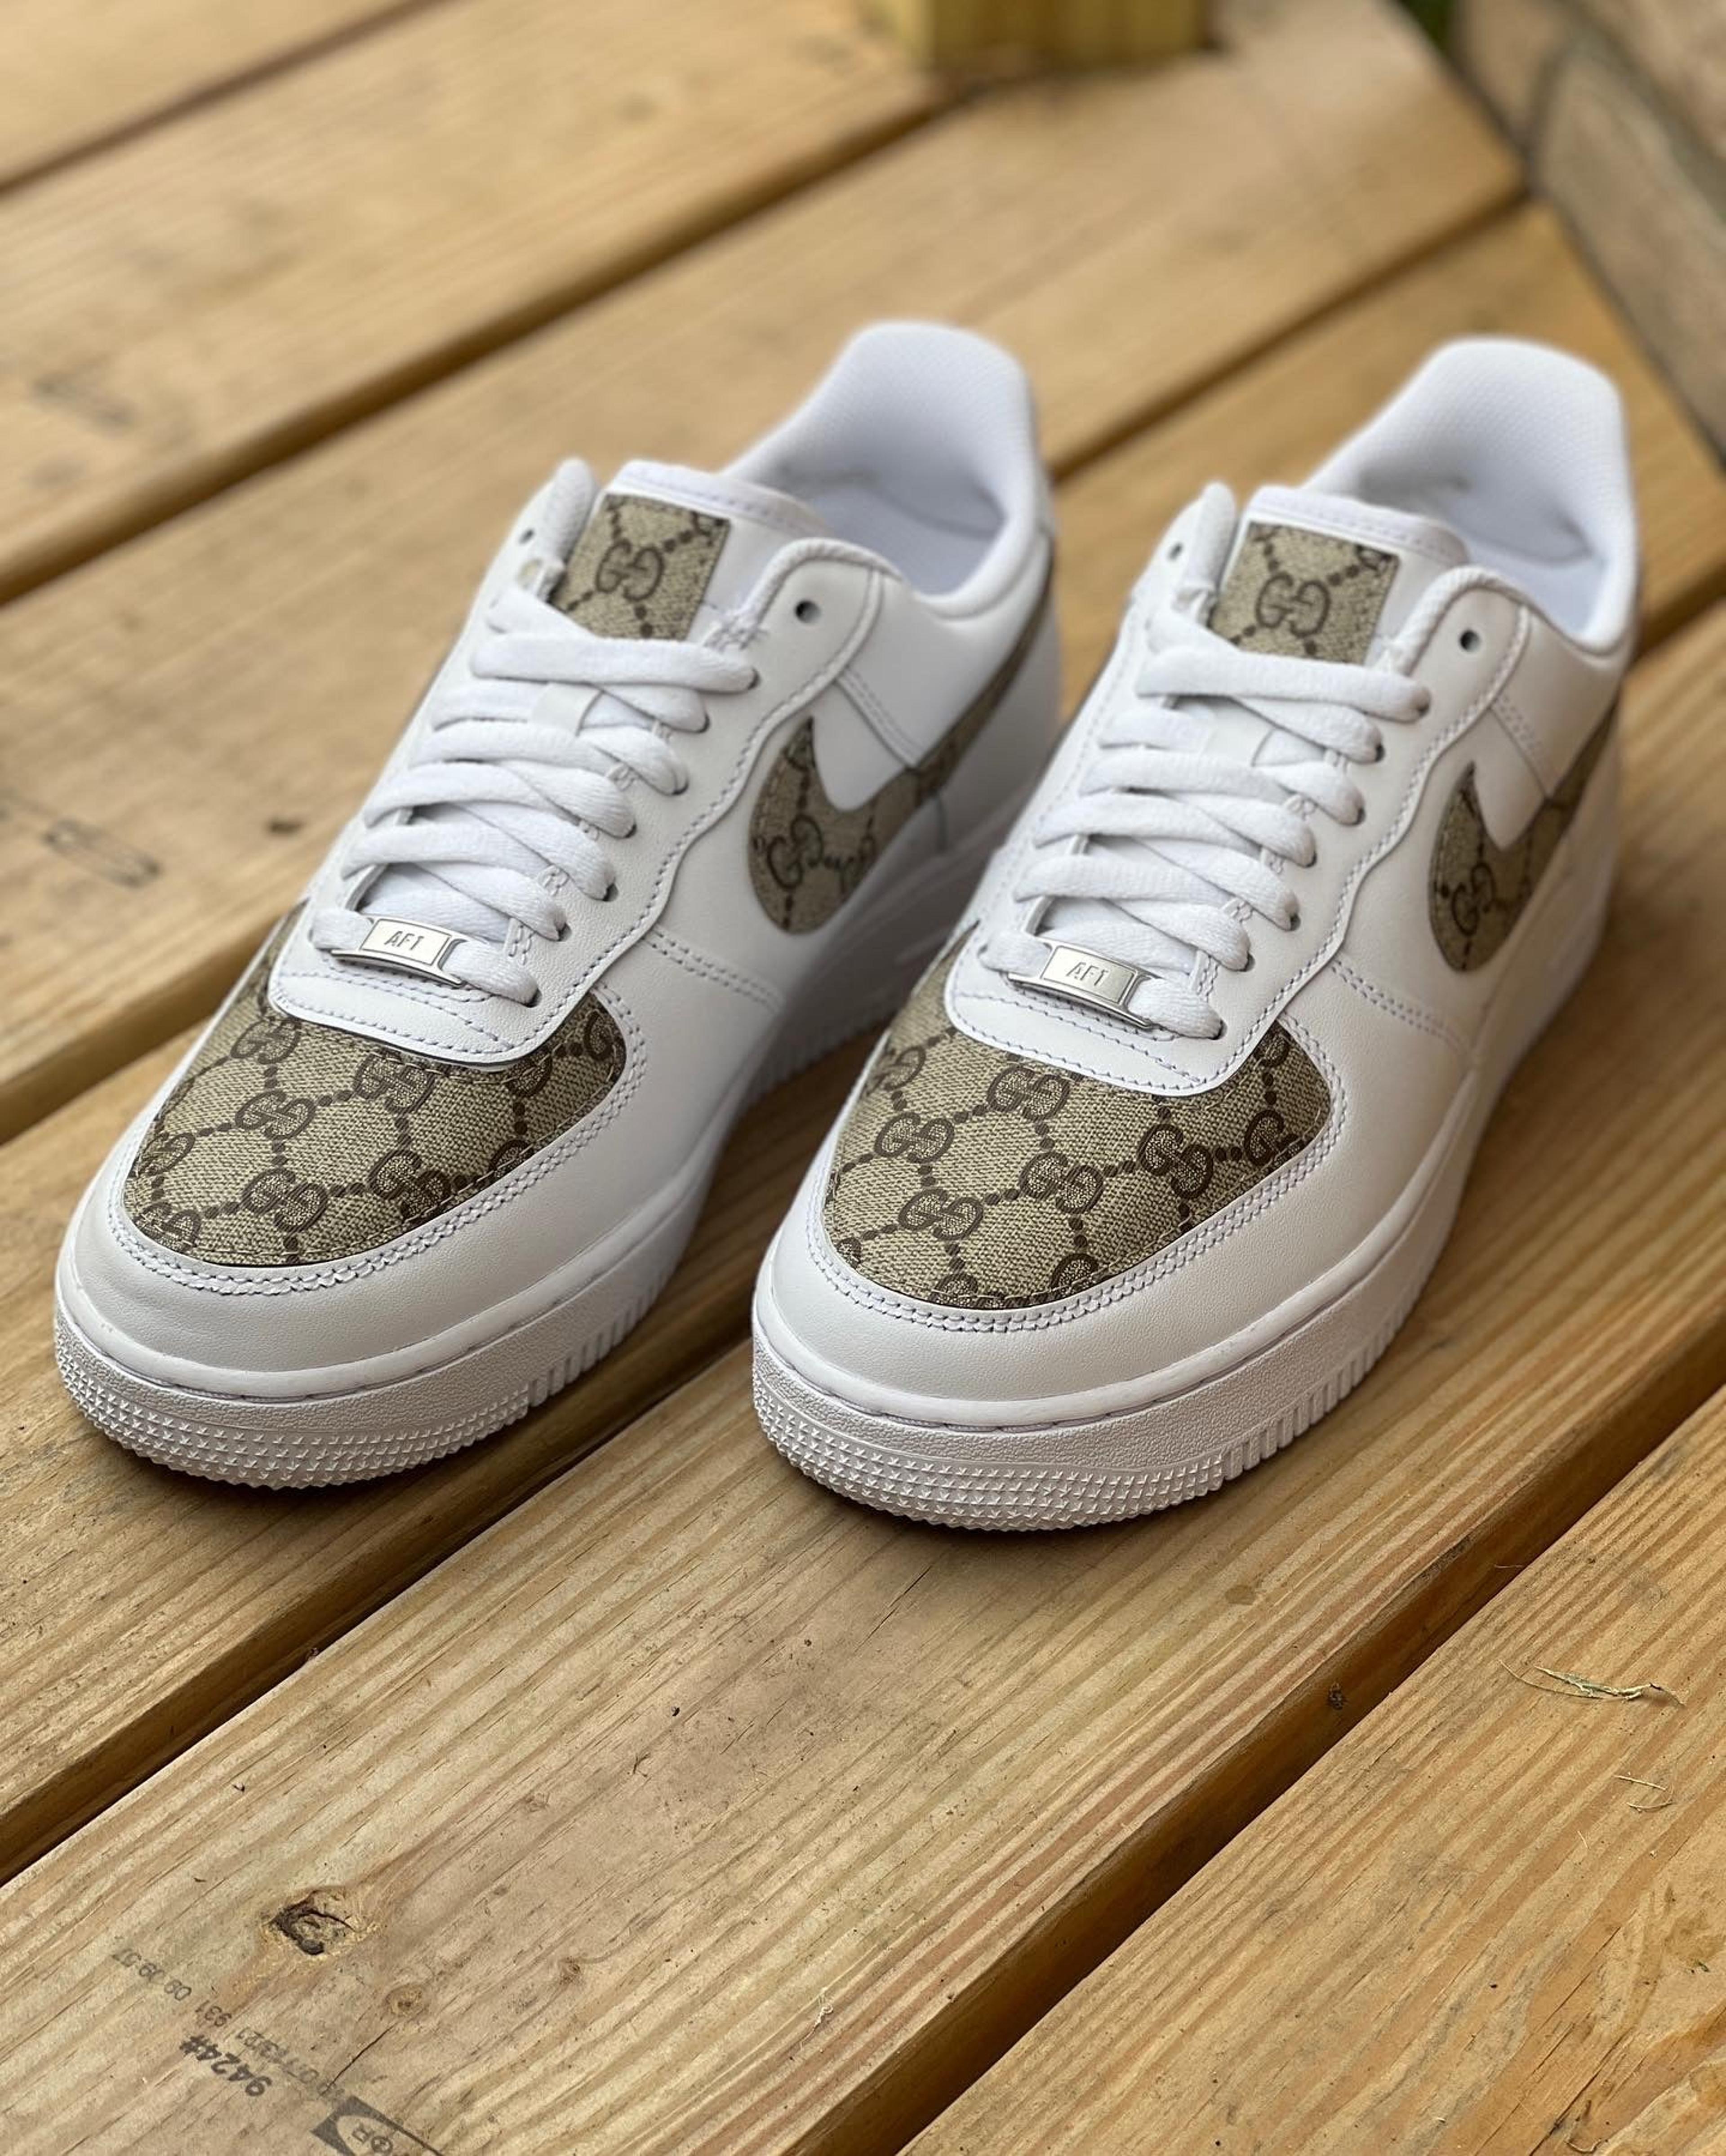 Custom Gucci x White Air Force 1 Lows - with Toe Box